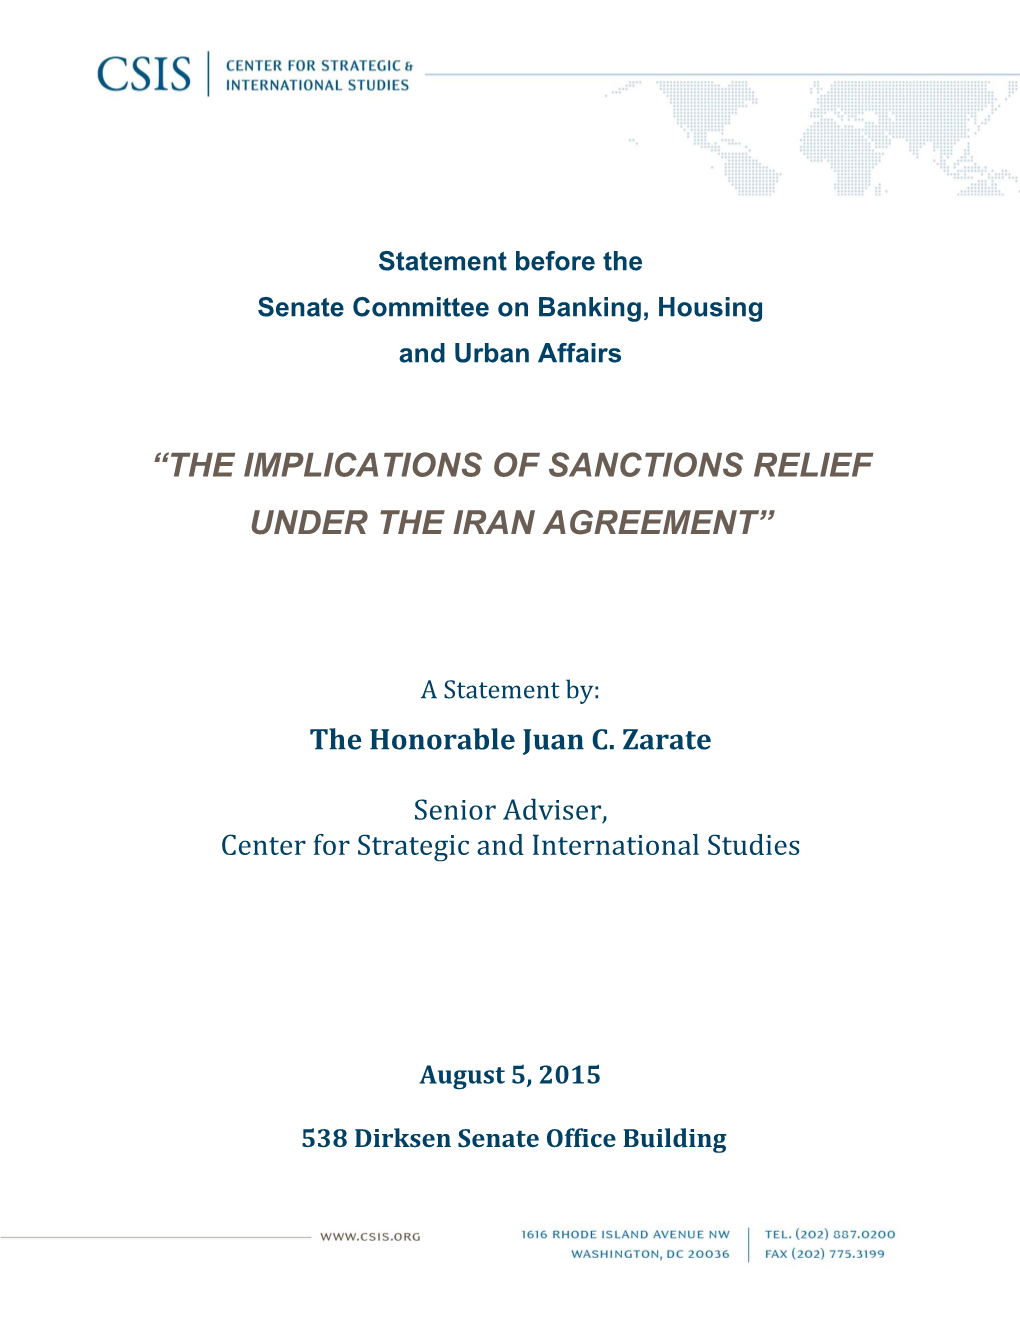 “The Implications of Sanctions Relief Under the Iran Agreement”